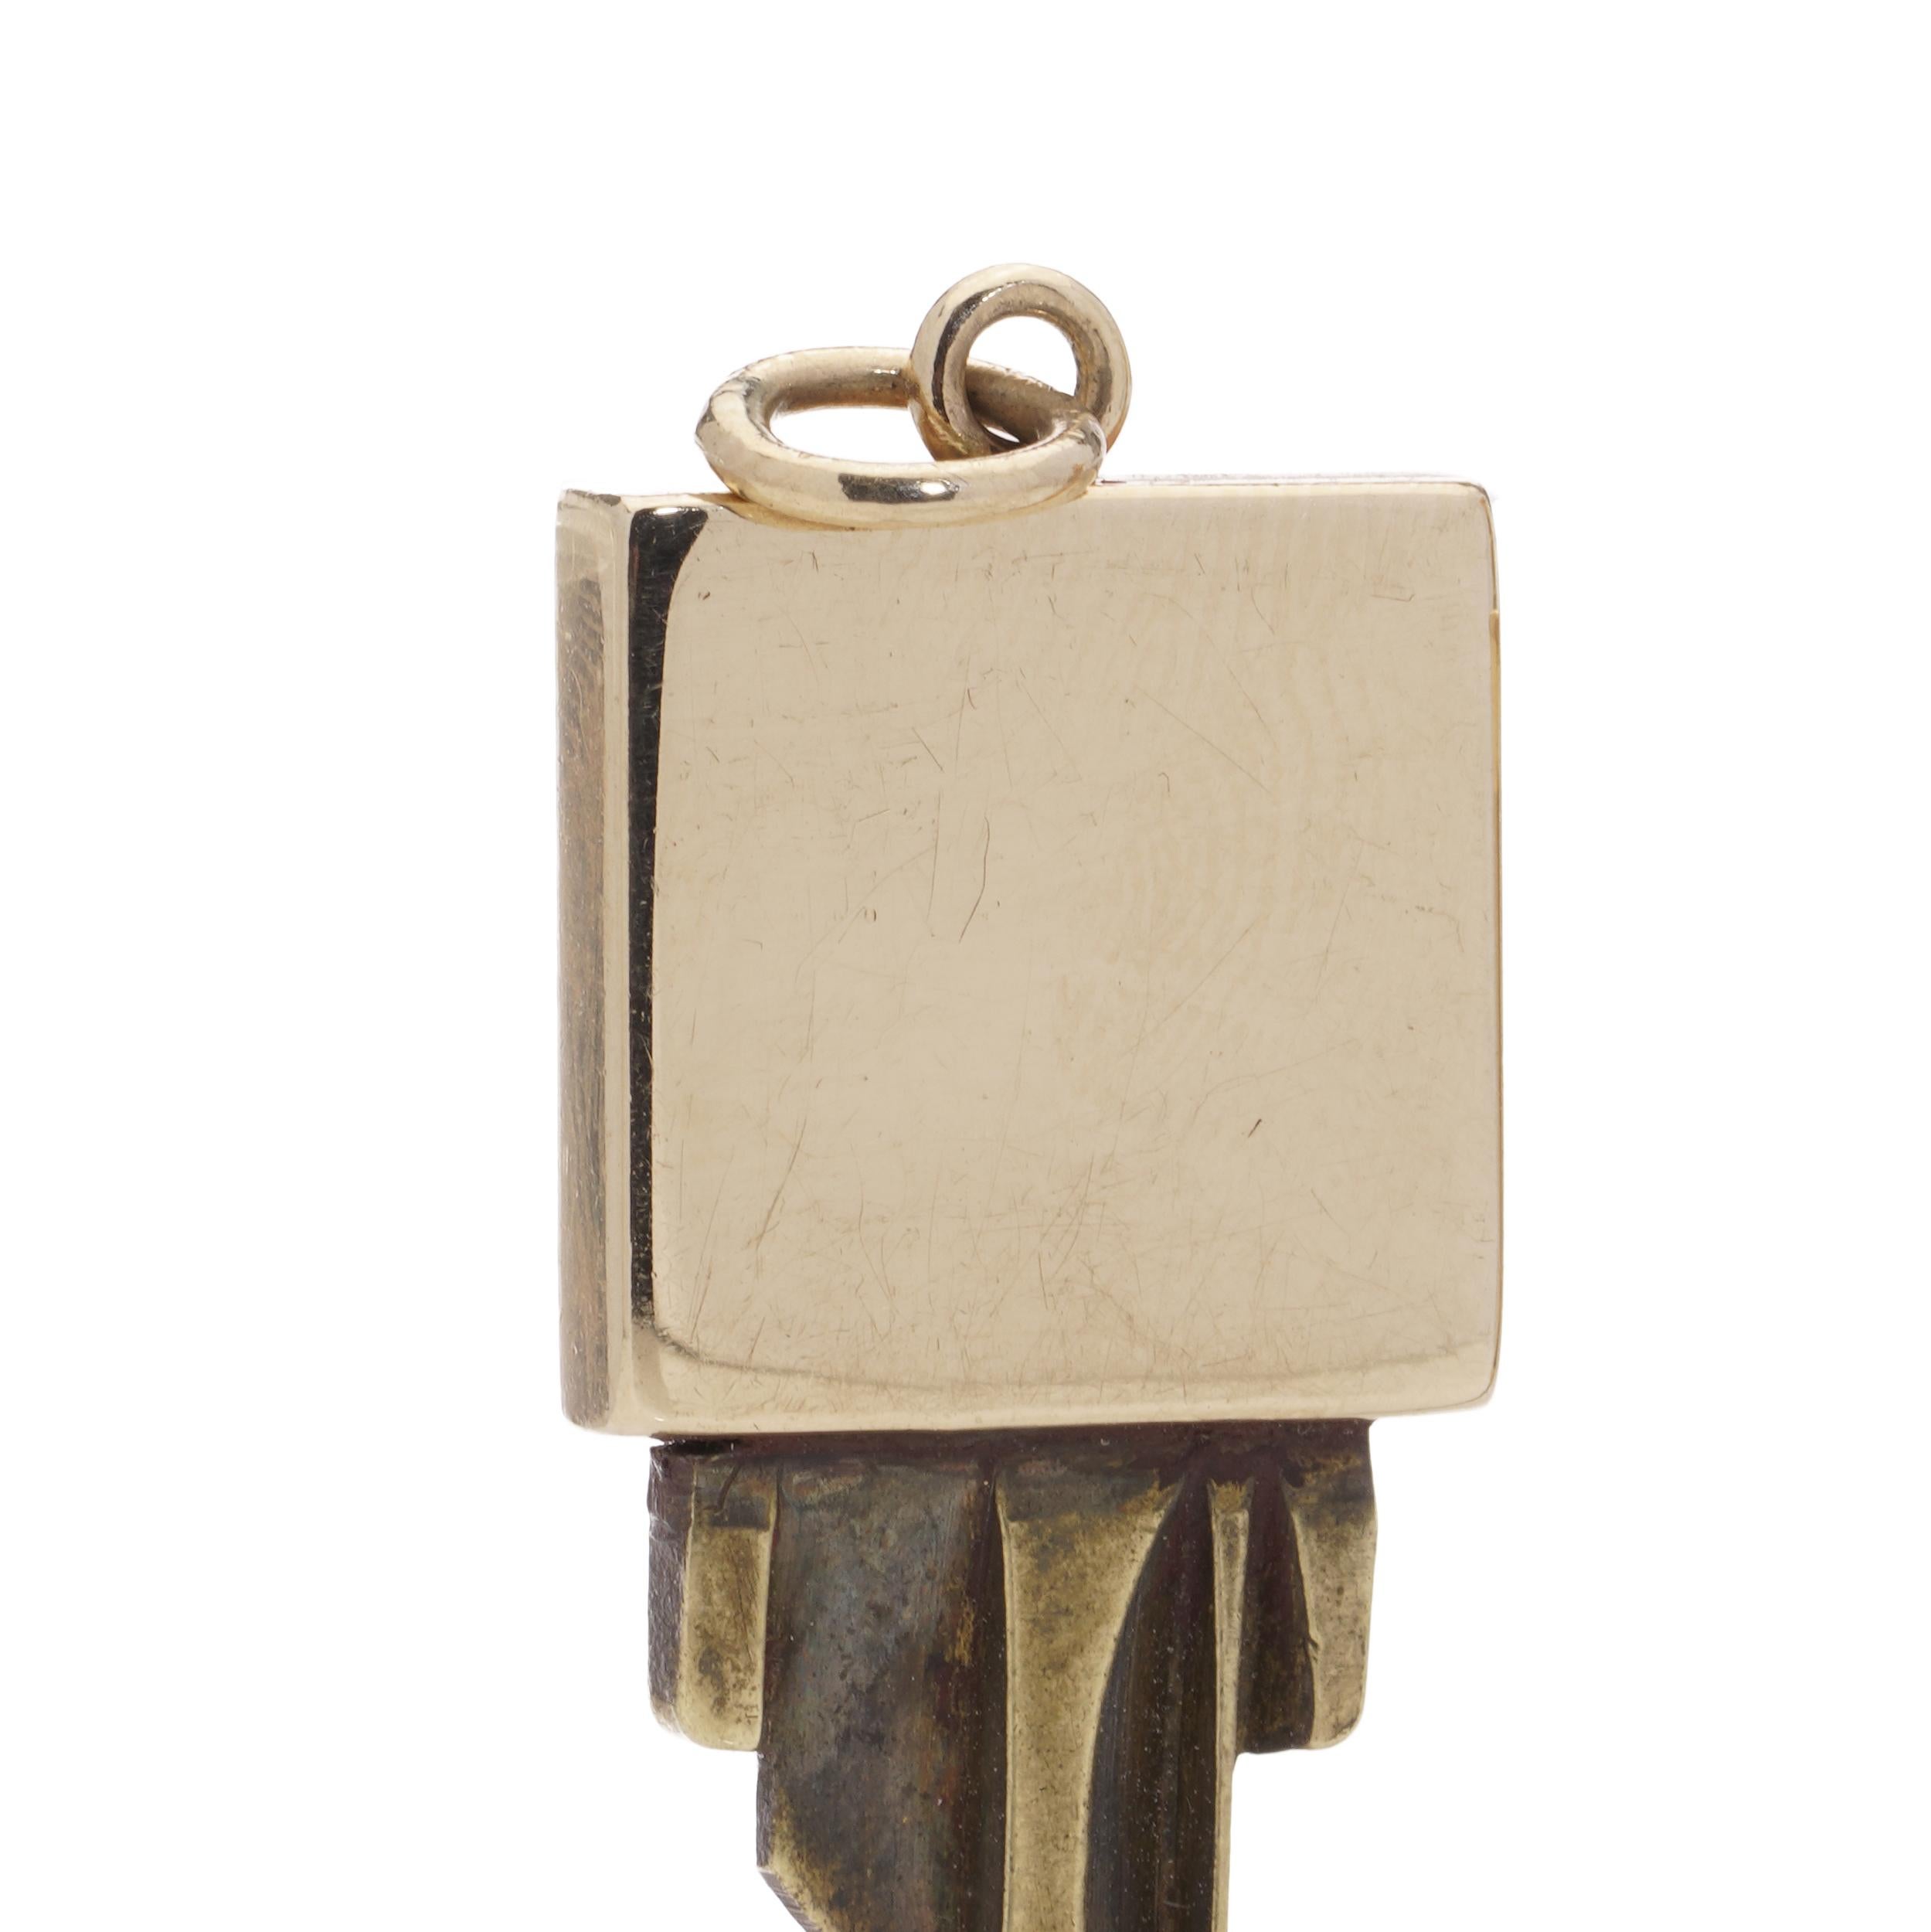 Two gold mounted keys, one with Cadillac logo design finial, Tiffany & Co. 14kt. For Sale 2